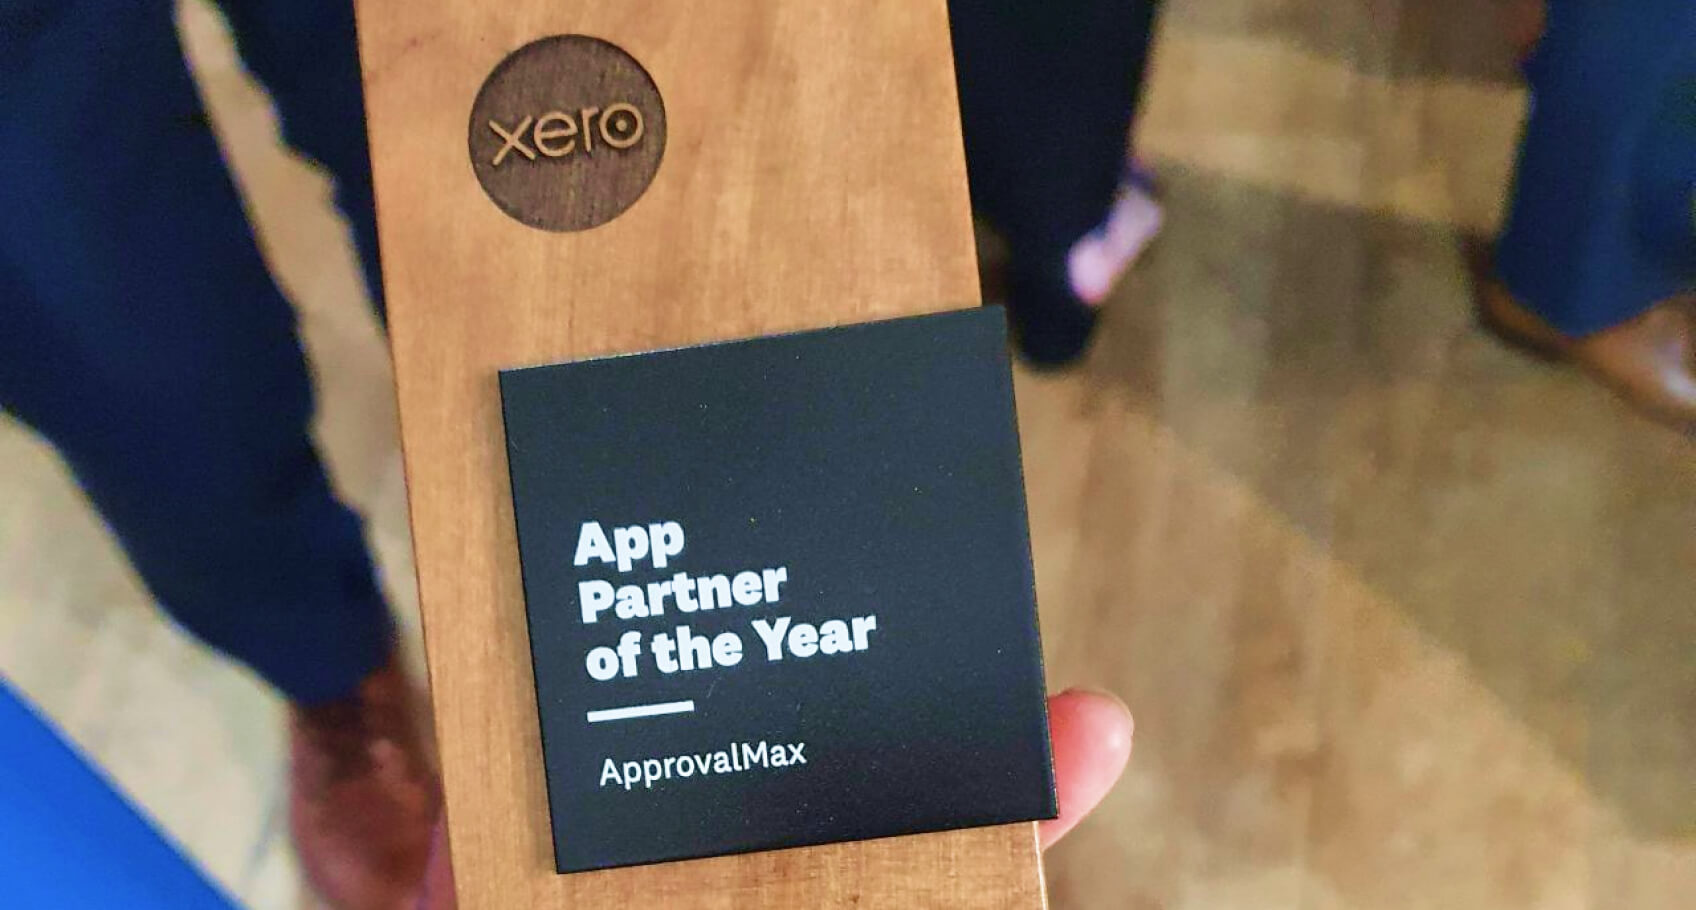 Xero's App Partner of the Year wooden trophy held in a person's hand